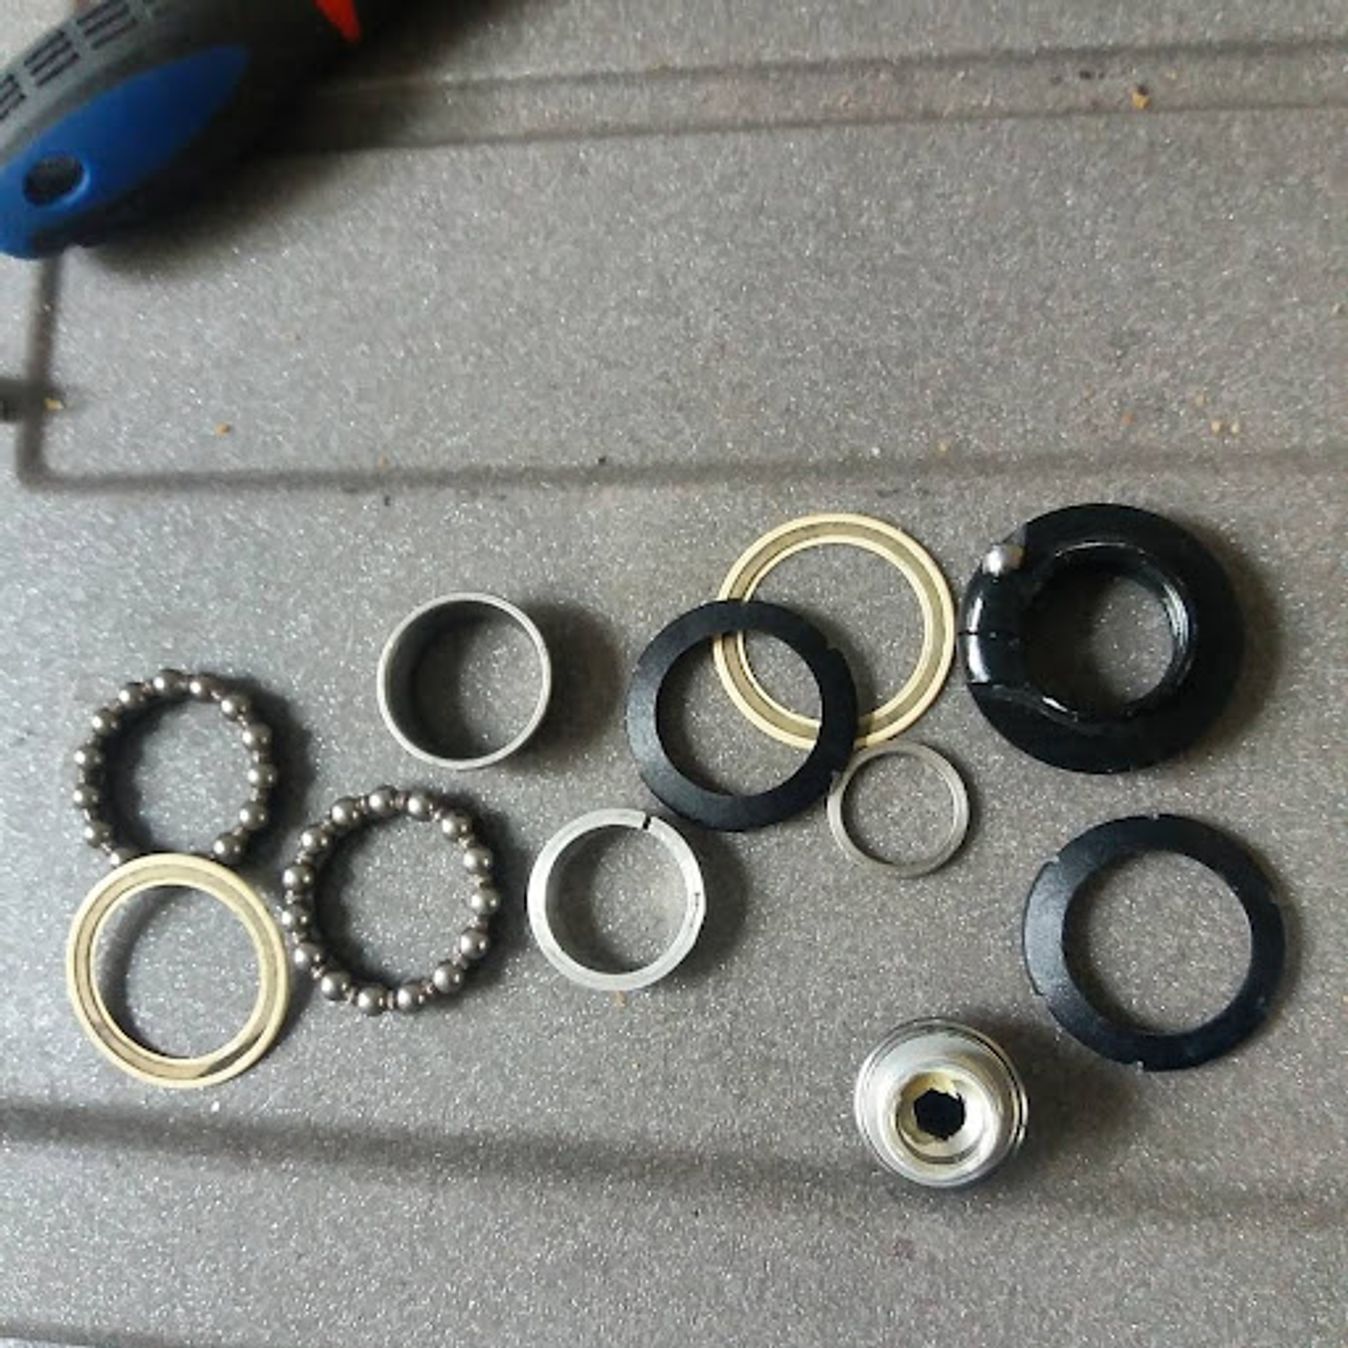 A selection of components ready to fix a bike